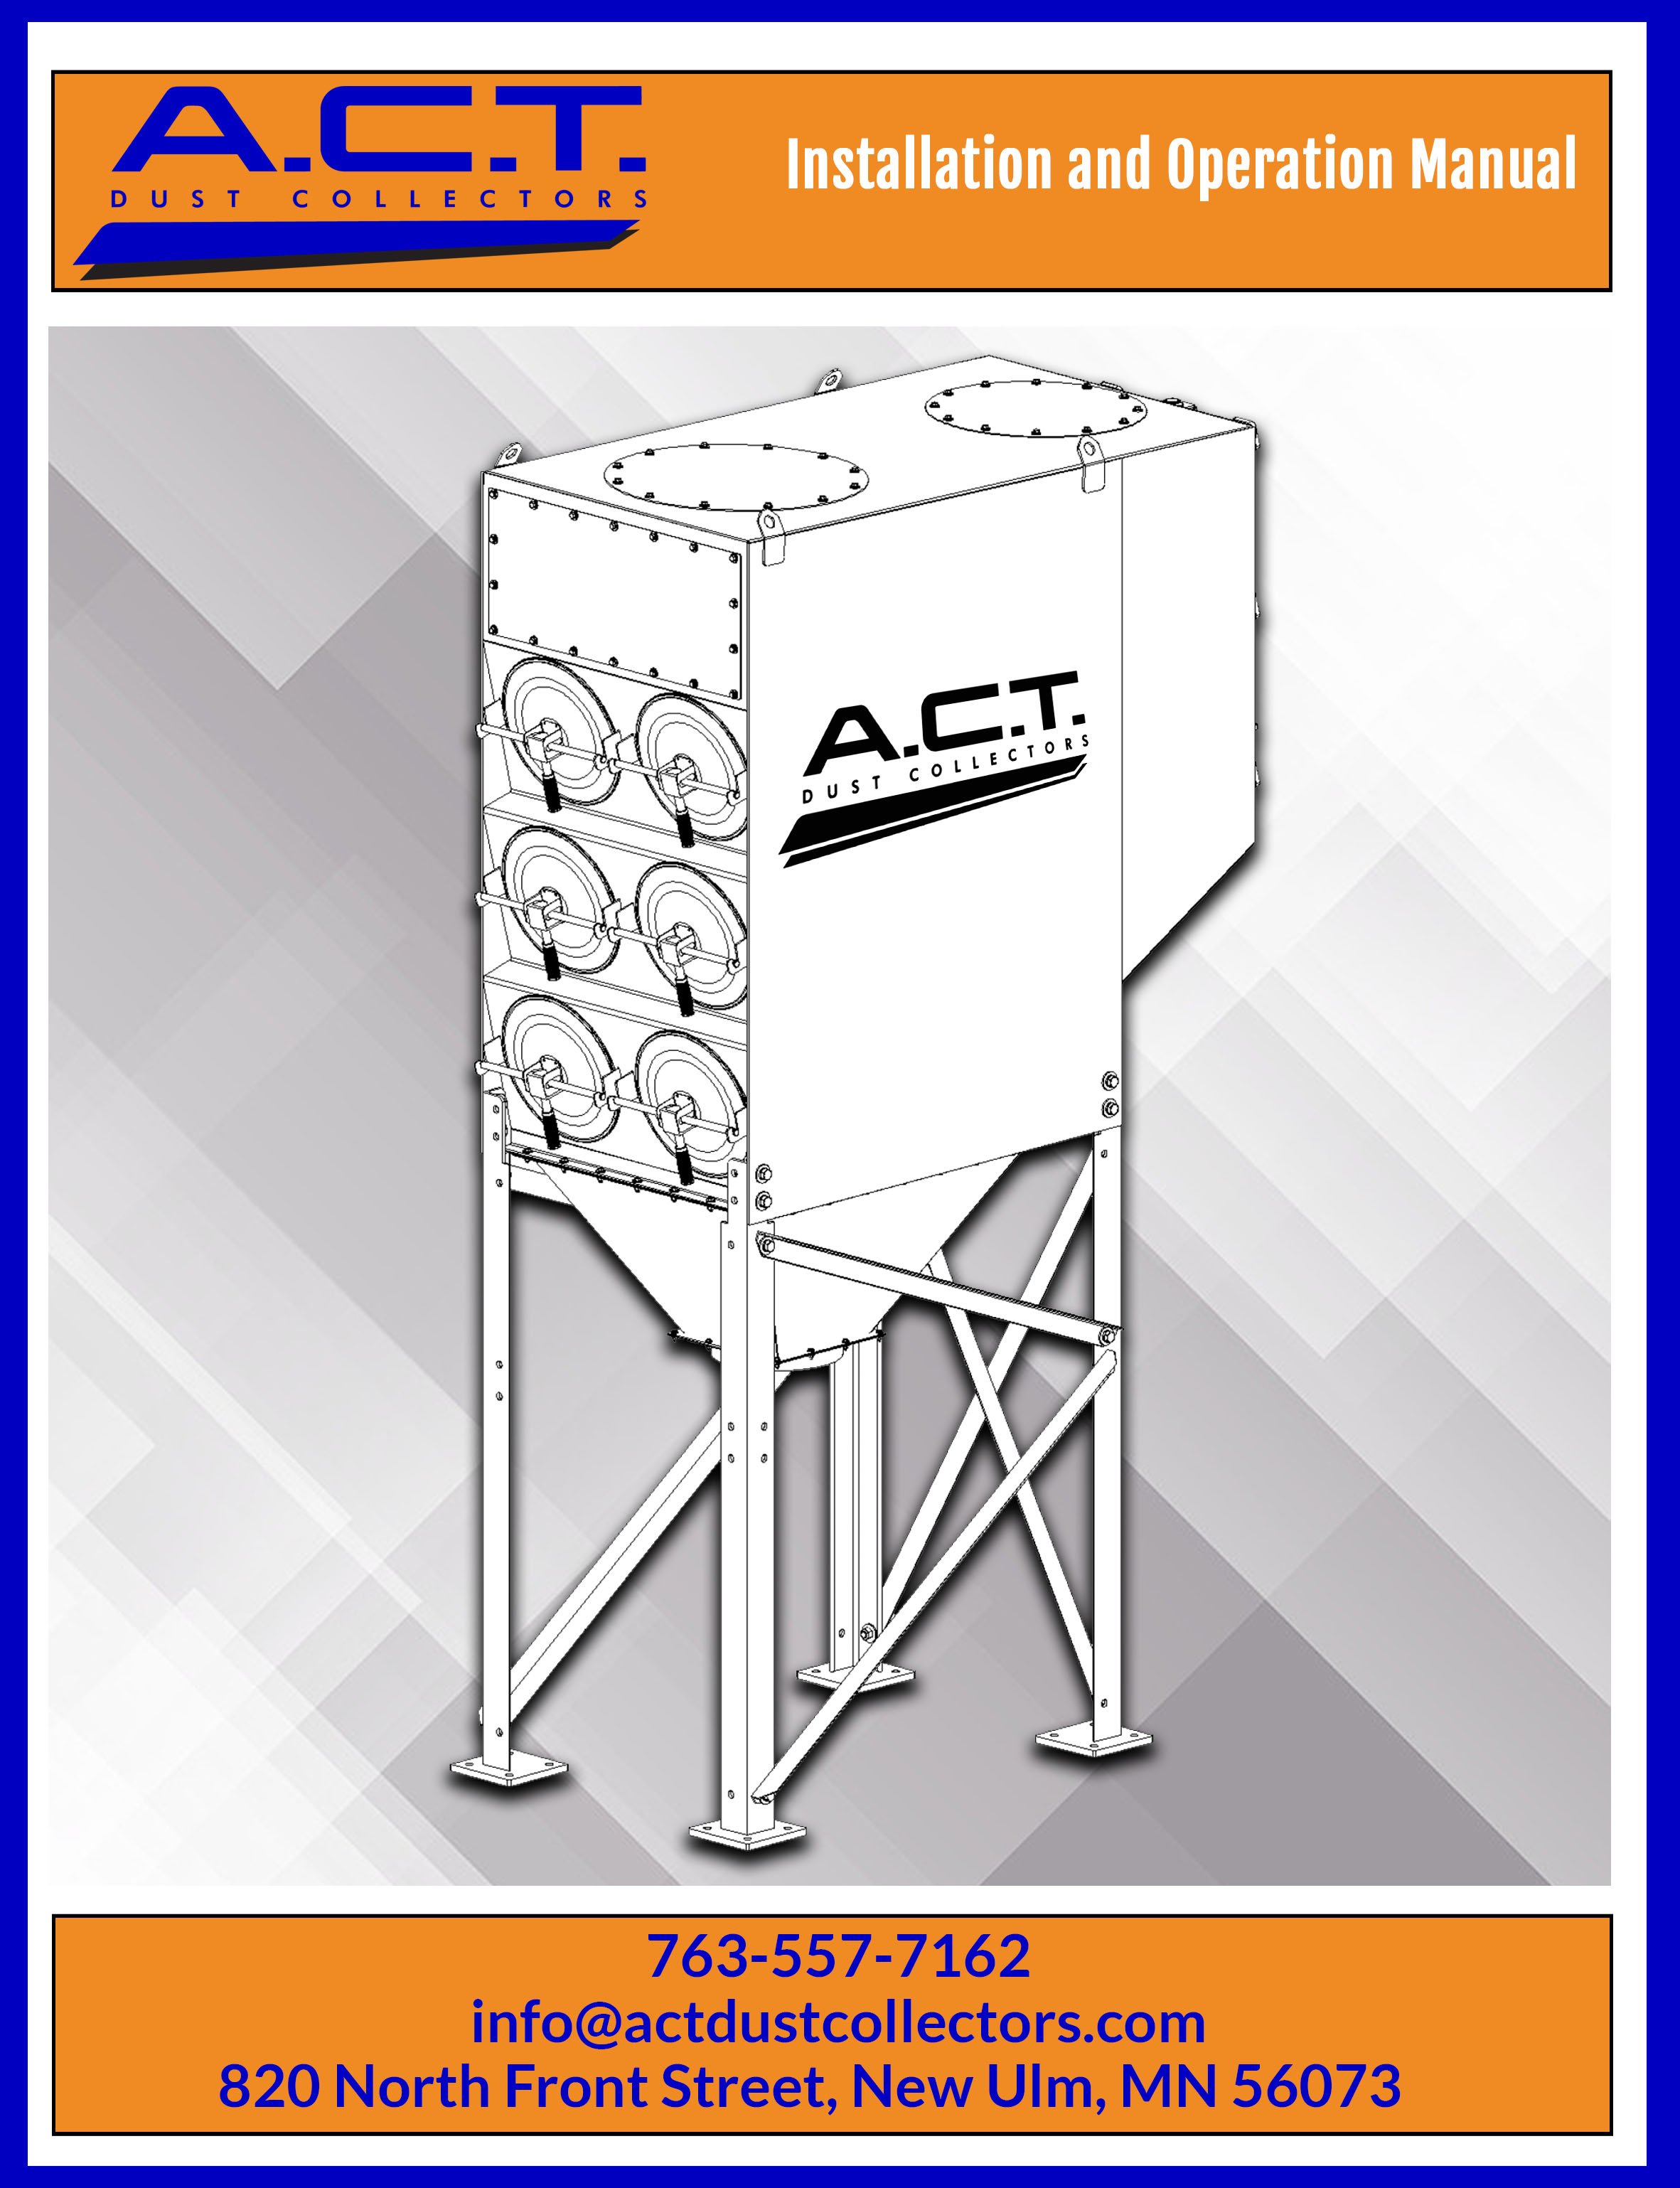 ACT Cartridge Dust Collectors Manual Cover 2022